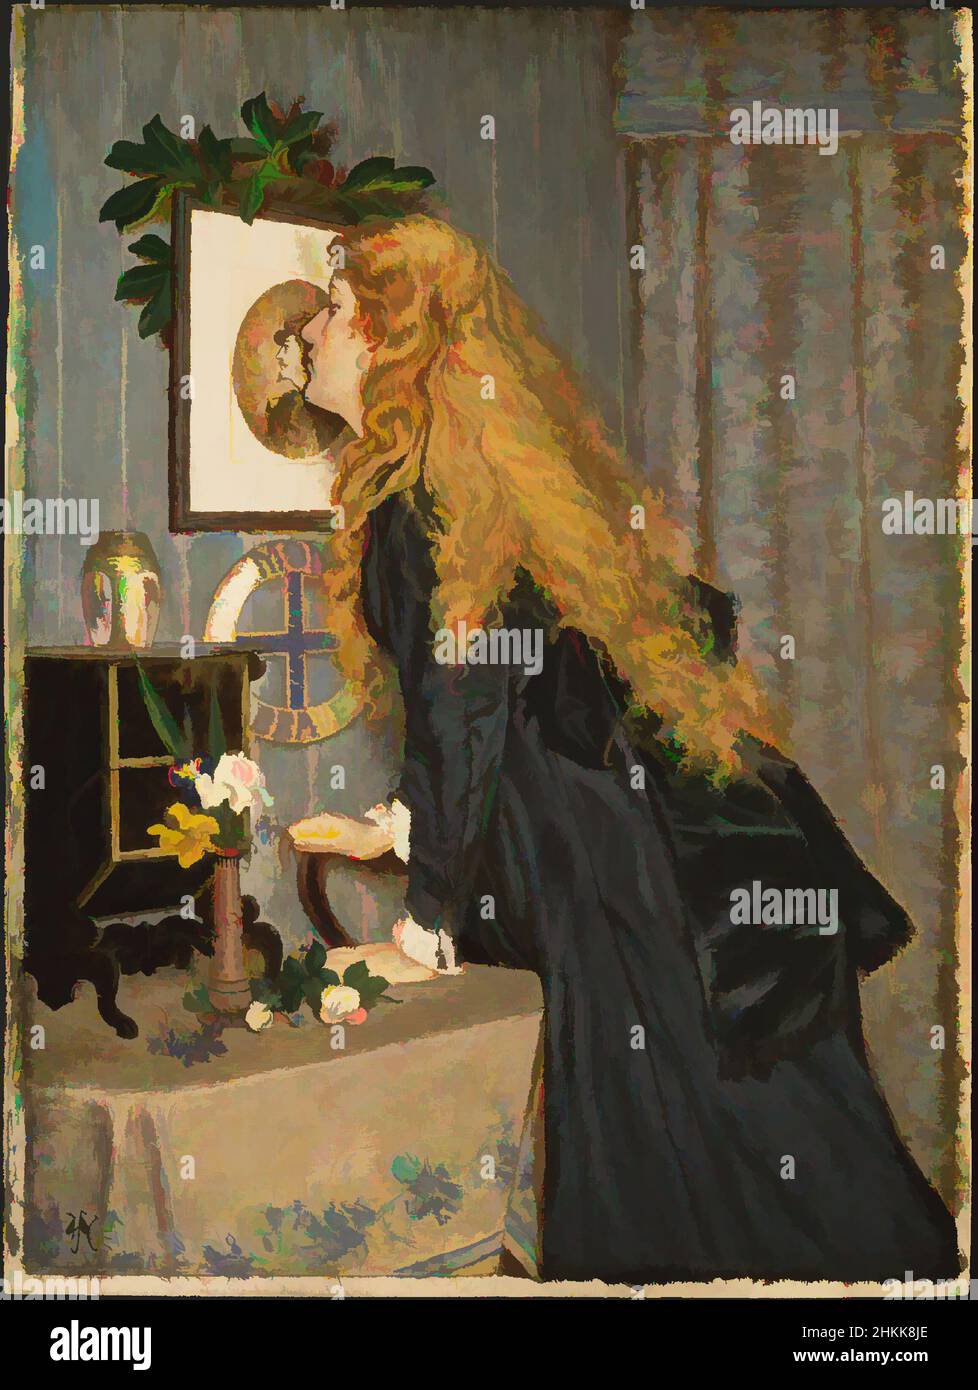 Art inspired by Mon Brave, William John Hennessy, American, 1839-1917, Oil on board, 1870, 11 15/16 x 8 15/16 in., 30.4 x 22.7 cm, 1870, Black, black dress, blond hair, blonde, bows, curls, dresser, Female Figure, flowers, hair, Interior, kiss, love, Oil on board, painting, shrine, Classic works modernized by Artotop with a splash of modernity. Shapes, color and value, eye-catching visual impact on art. Emotions through freedom of artworks in a contemporary way. A timeless message pursuing a wildly creative new direction. Artists turning to the digital medium and creating the Artotop NFT Stock Photo